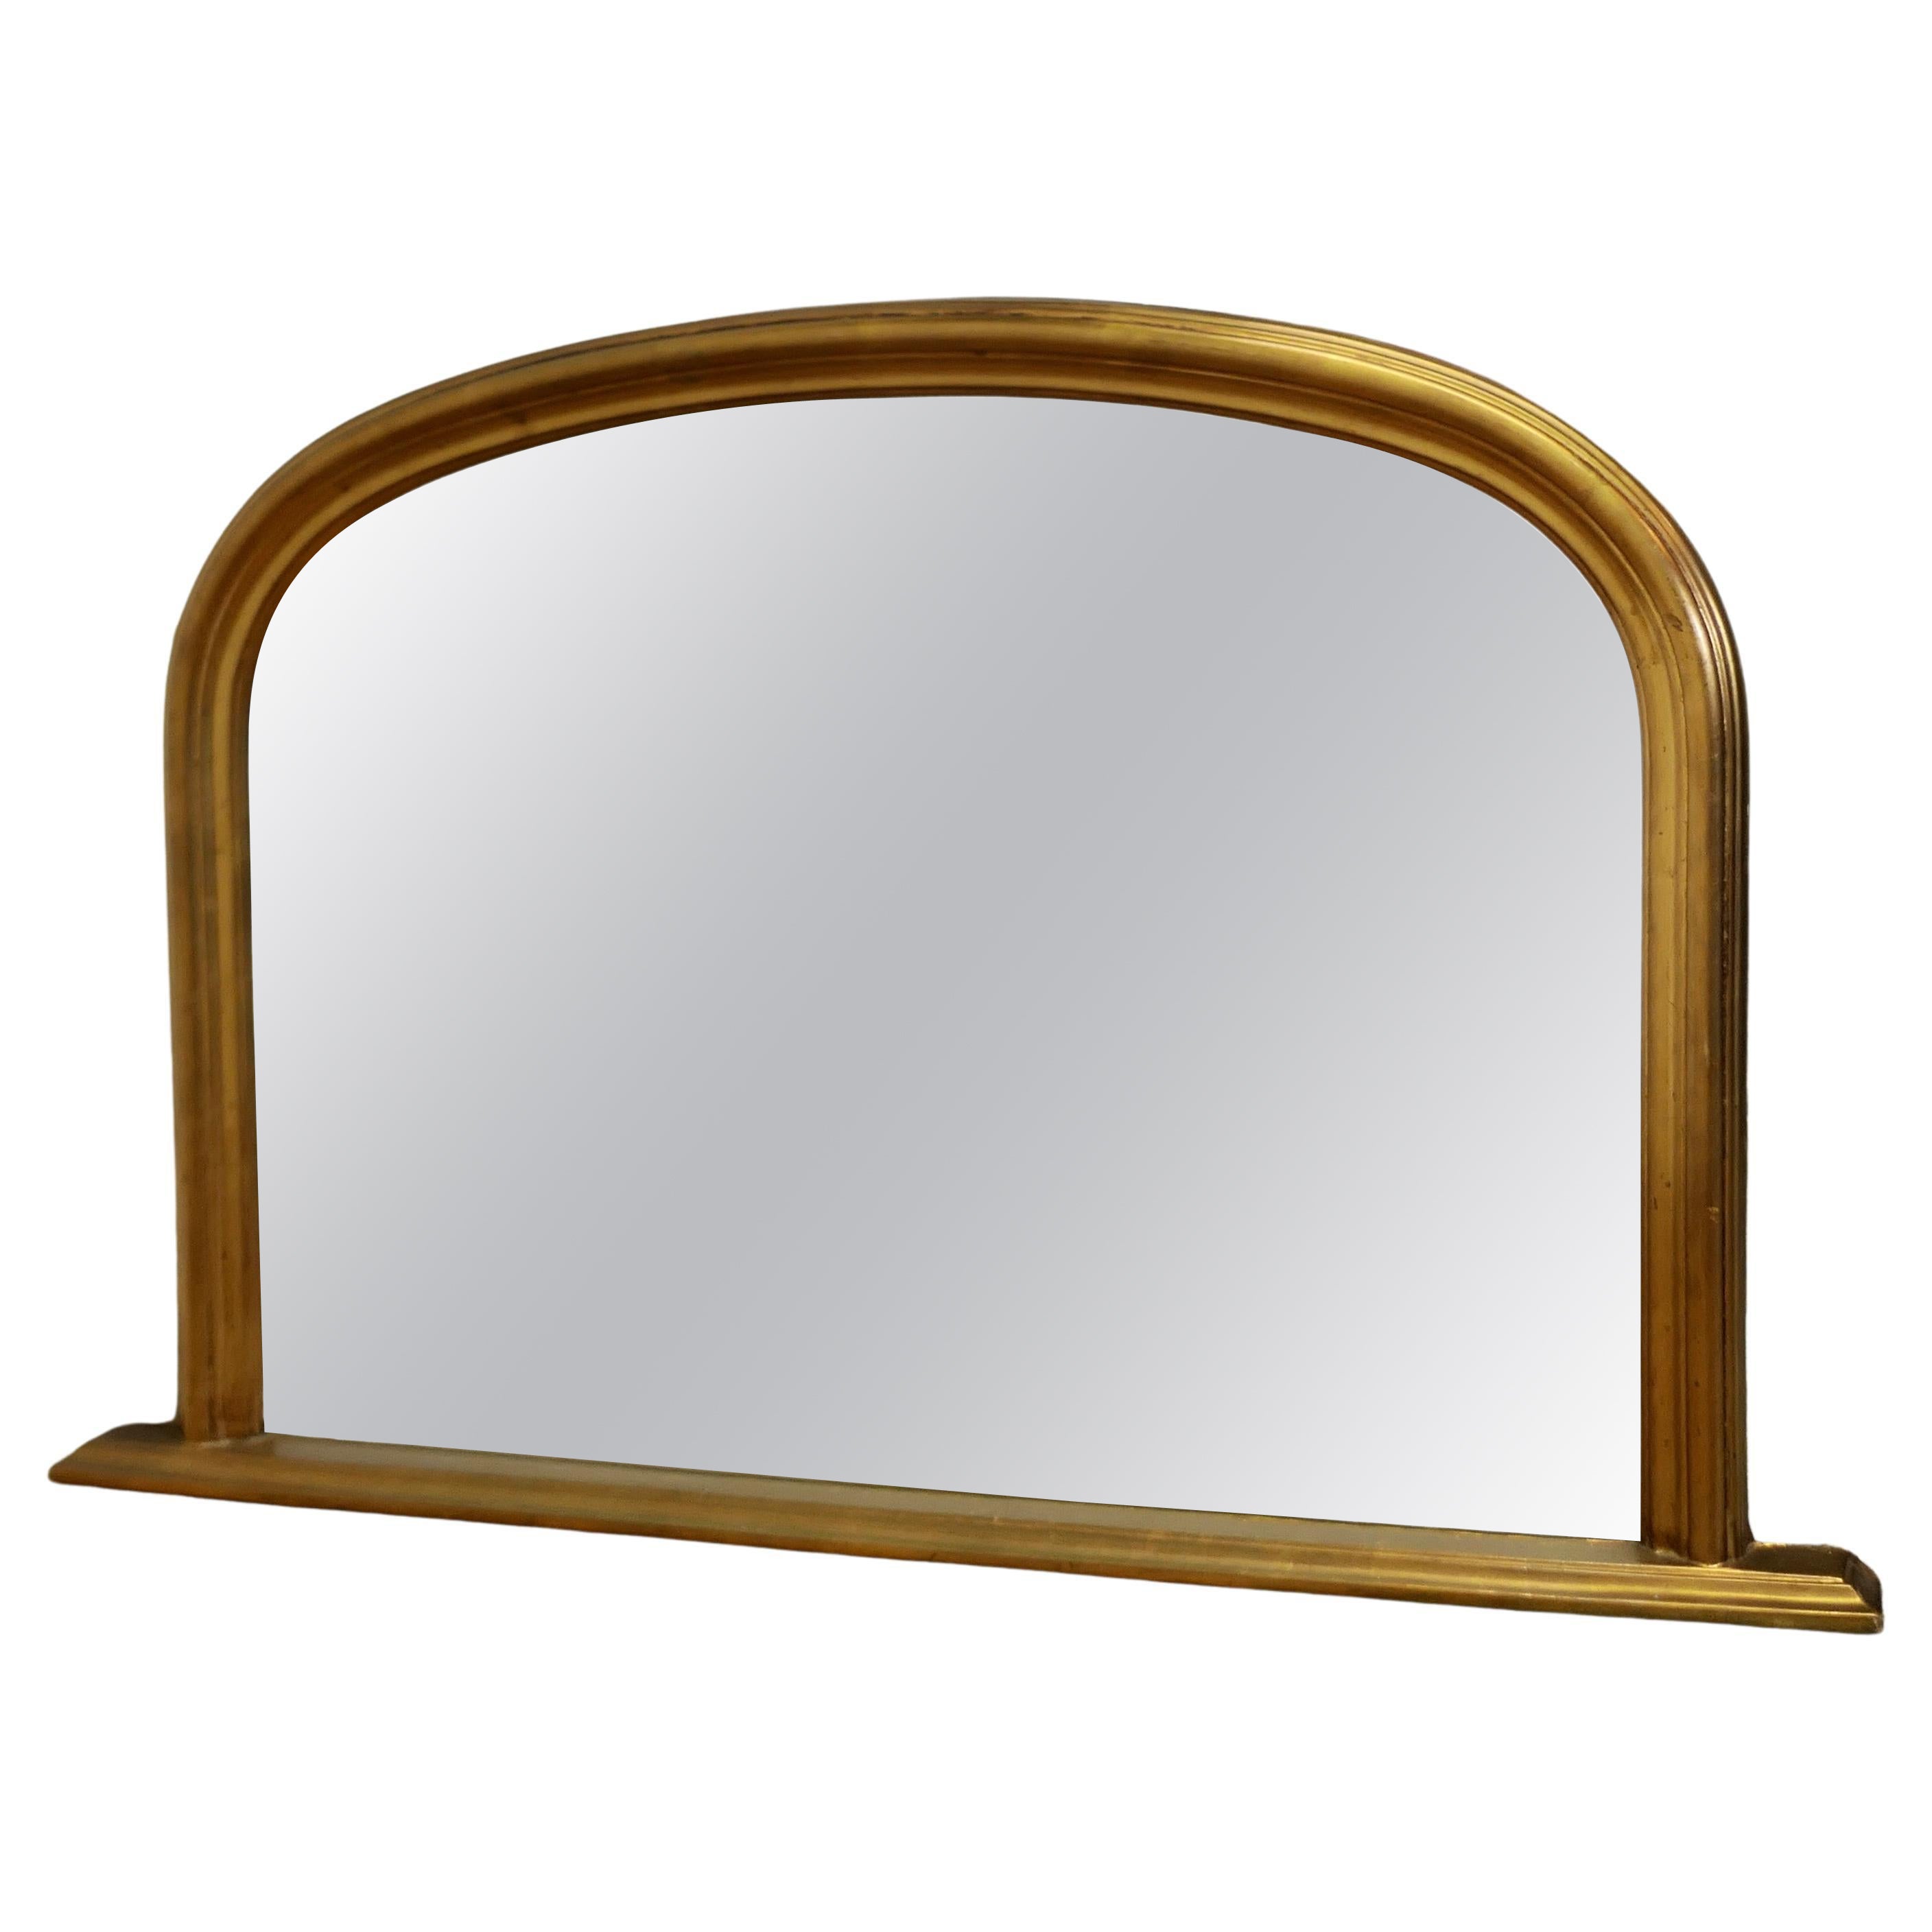 Victorian Style Arched Gold Overmantel Mirror  A Lovely Over Mantle Mirror   For Sale